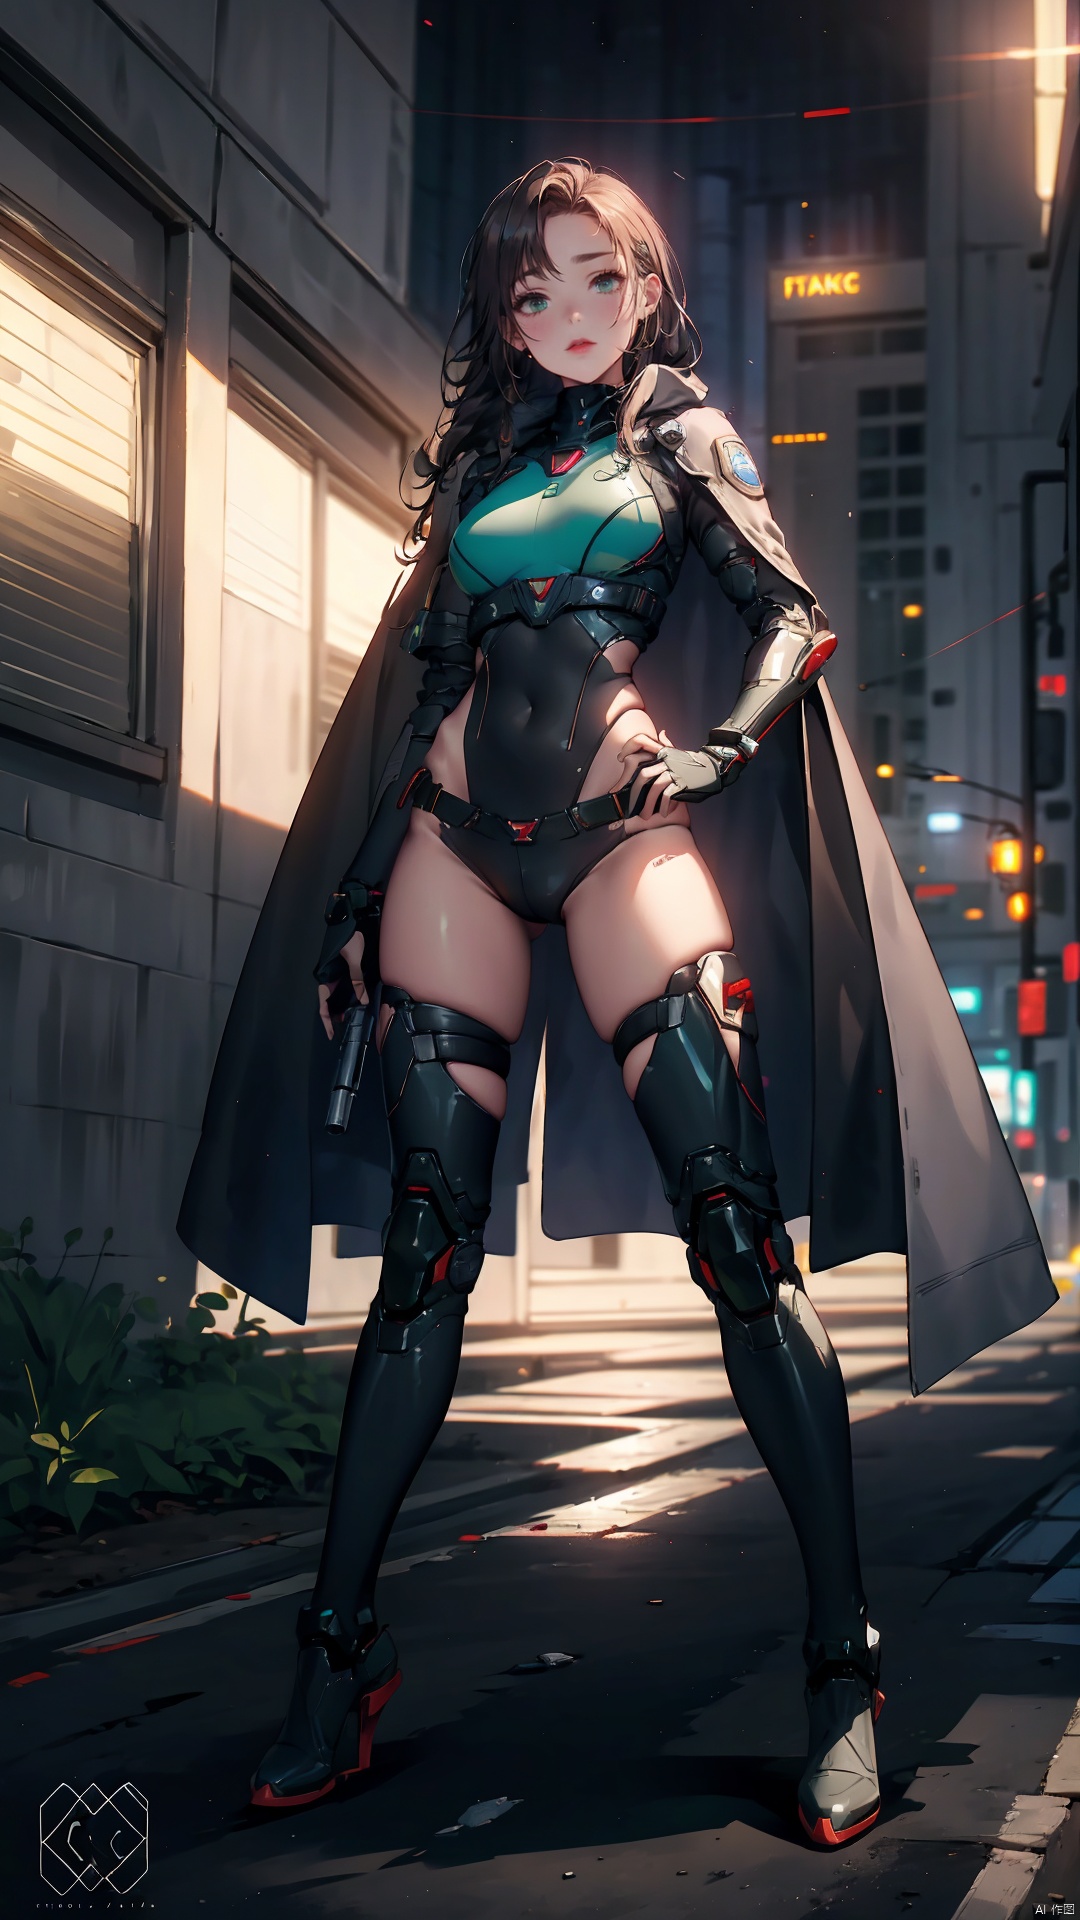  masterpiece, best quality, highres, incredibly absurdres, 1figure, cyberpunk, futuristic, female, rogue agent, glowing tattoos, full-body armor, tactical visor, high-tech gauntlets, utility belt, exposed abdomen, chest plate, synthetic dreadlocks, green cybernetic eyes, shoulder pauldrons, flowing cape, thigh-high boots with buckles, energy weapon, digital camouflage patterns, augmented reality display, fingerless gloves, micro-missile launcher, dual pistols, cybernetic enhancements, ripped bodysuit, stern expression, lithe stance, half-cape, utility pouches, visible internal circuitry, cyber-eye HUD, red lip color, scar over left eyebrow, weathered urban backdrop, combat ready, ((poakl))